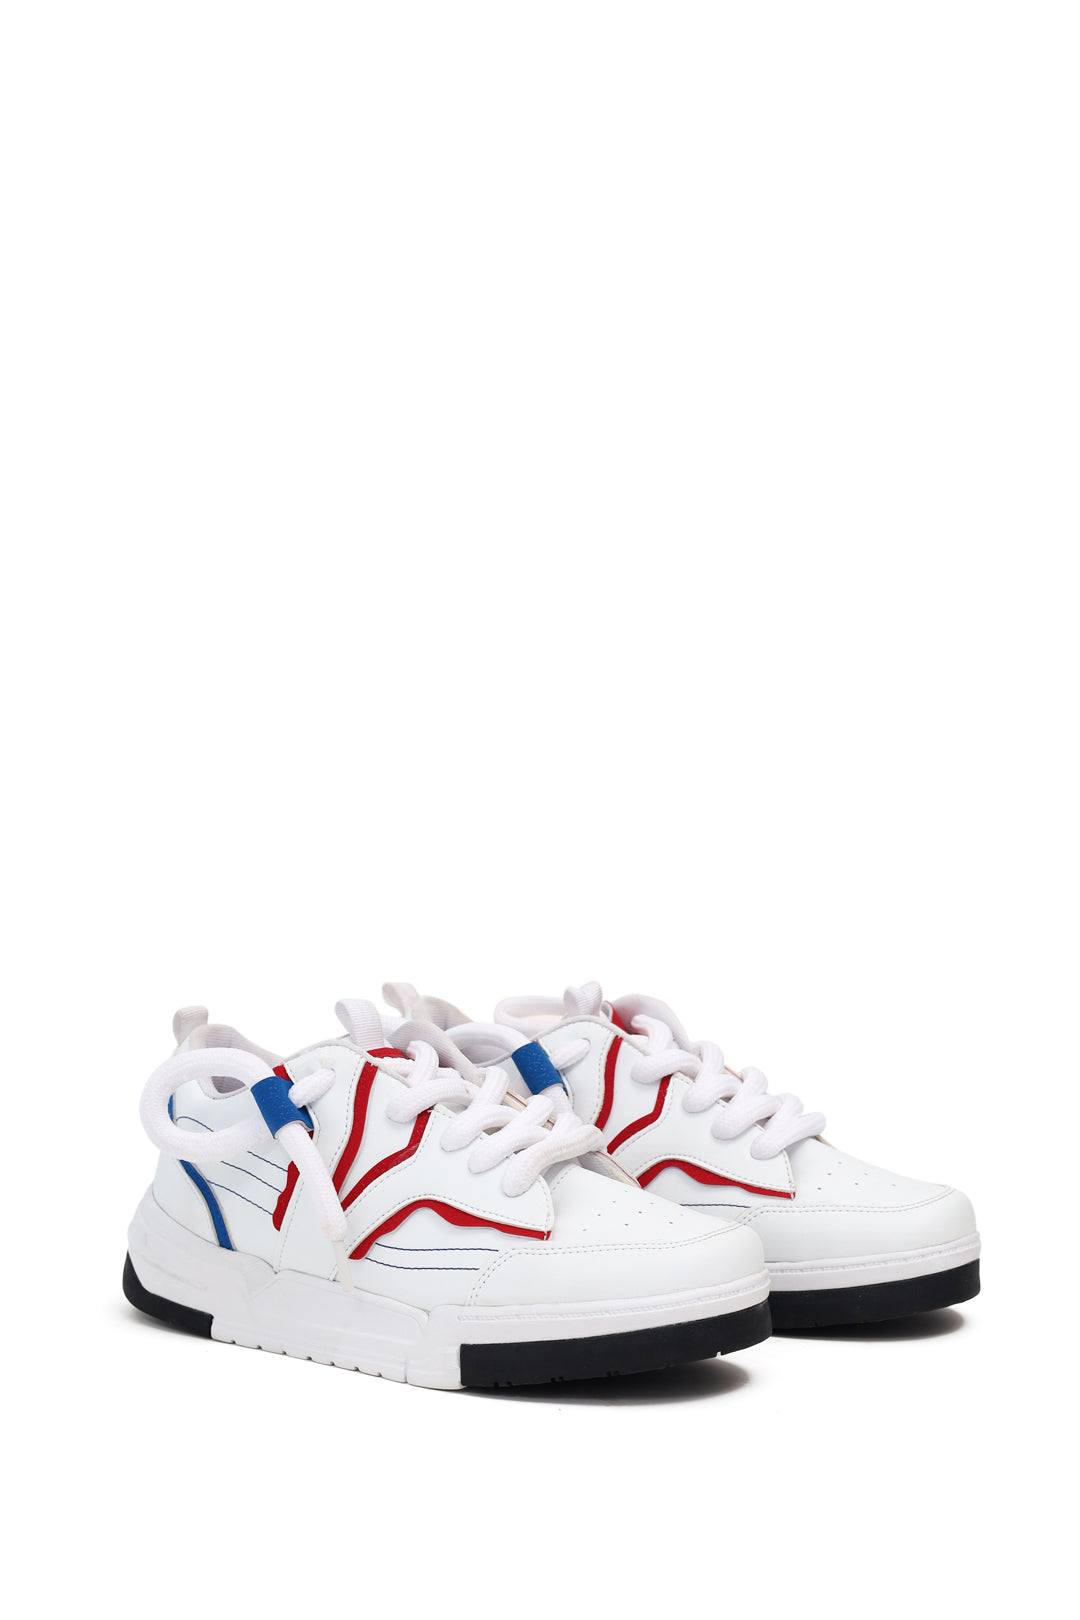 Vapro White/Red Low Top Trainer